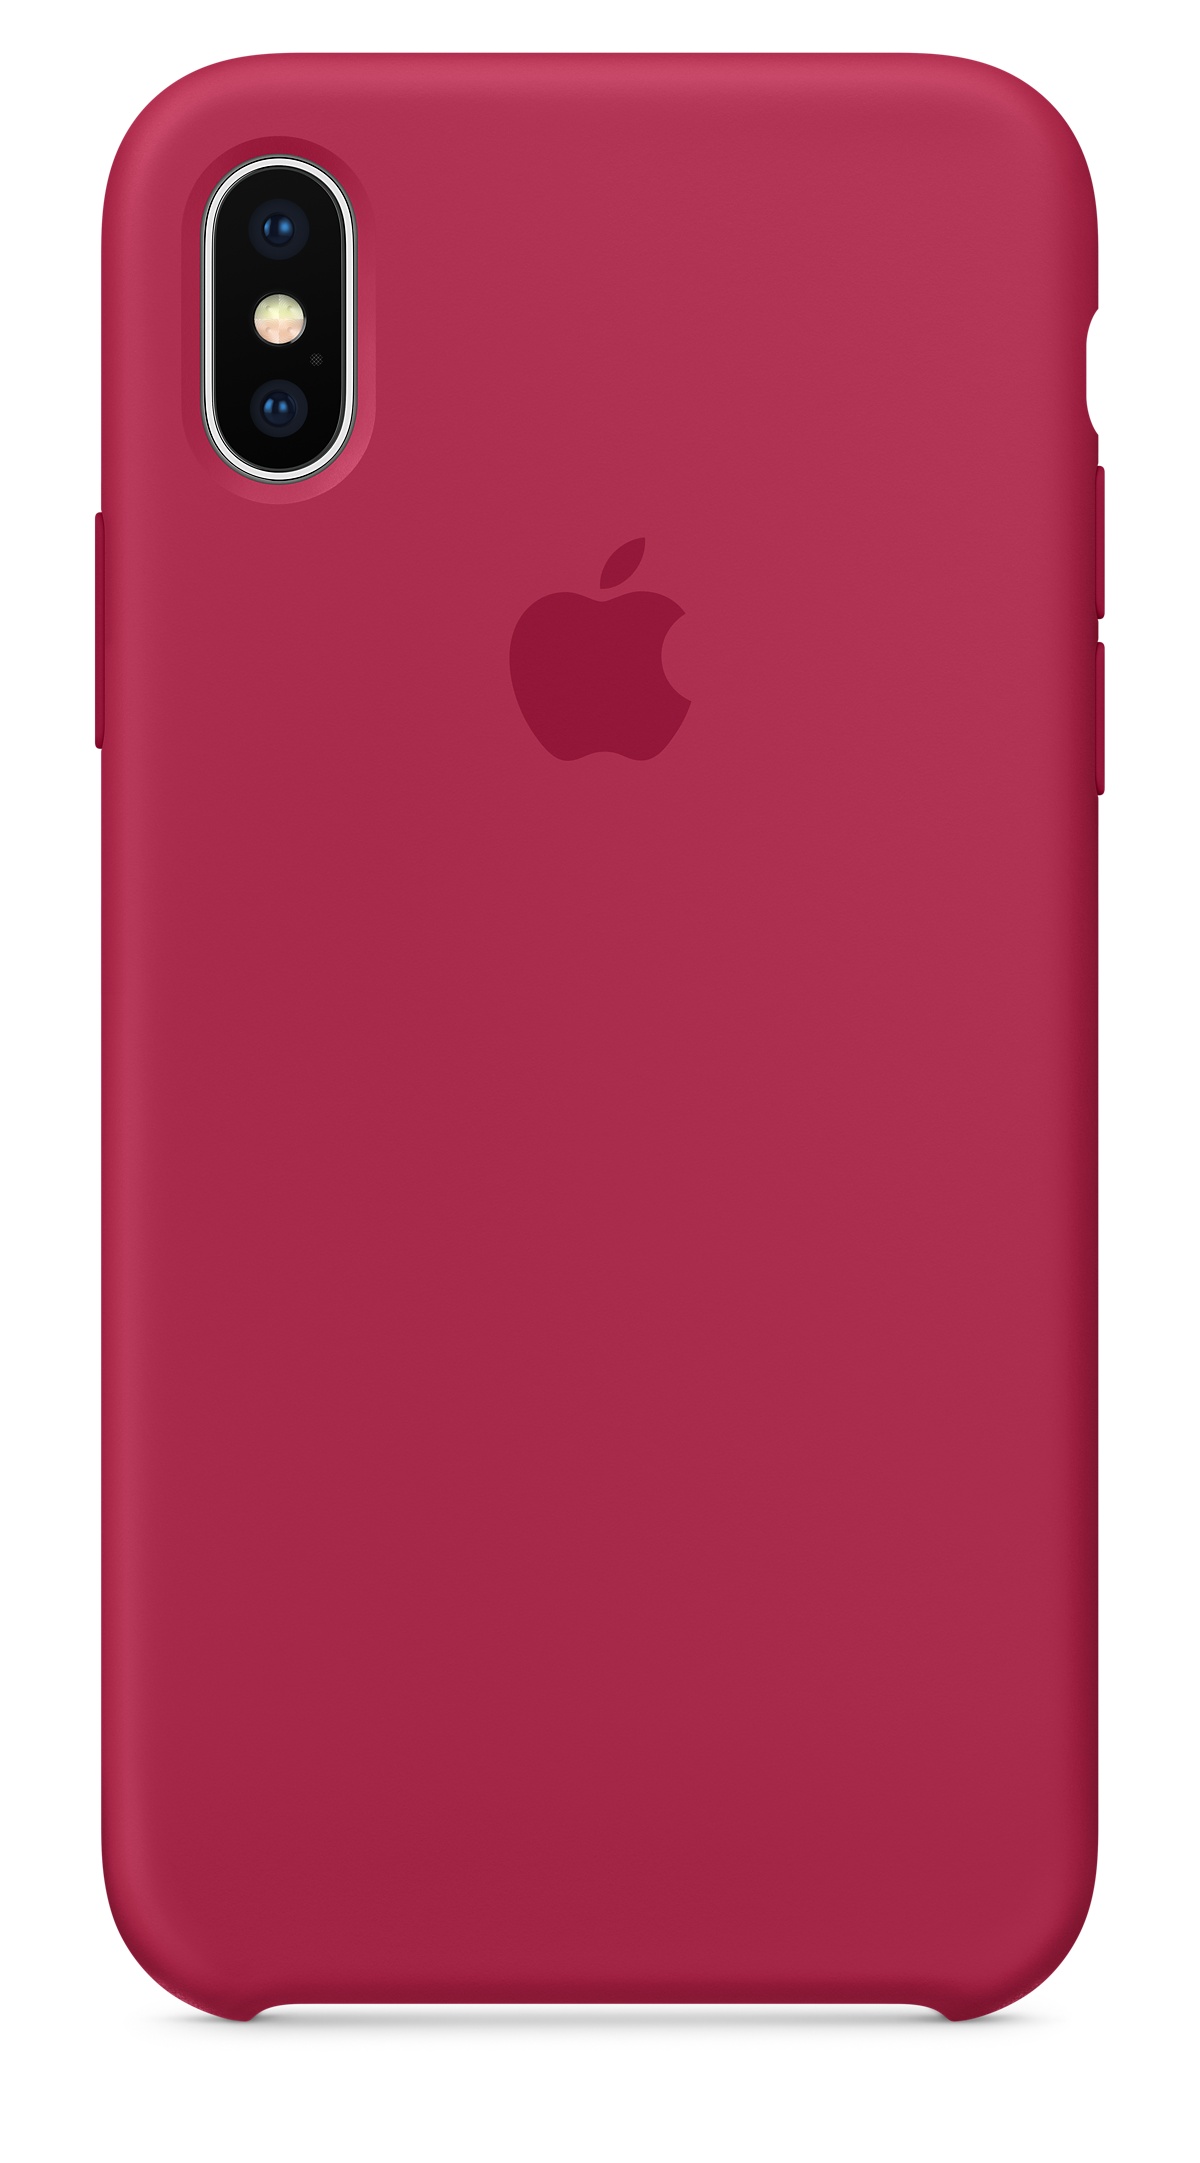 iPhone X Silicone Case - Rose Red - Apple